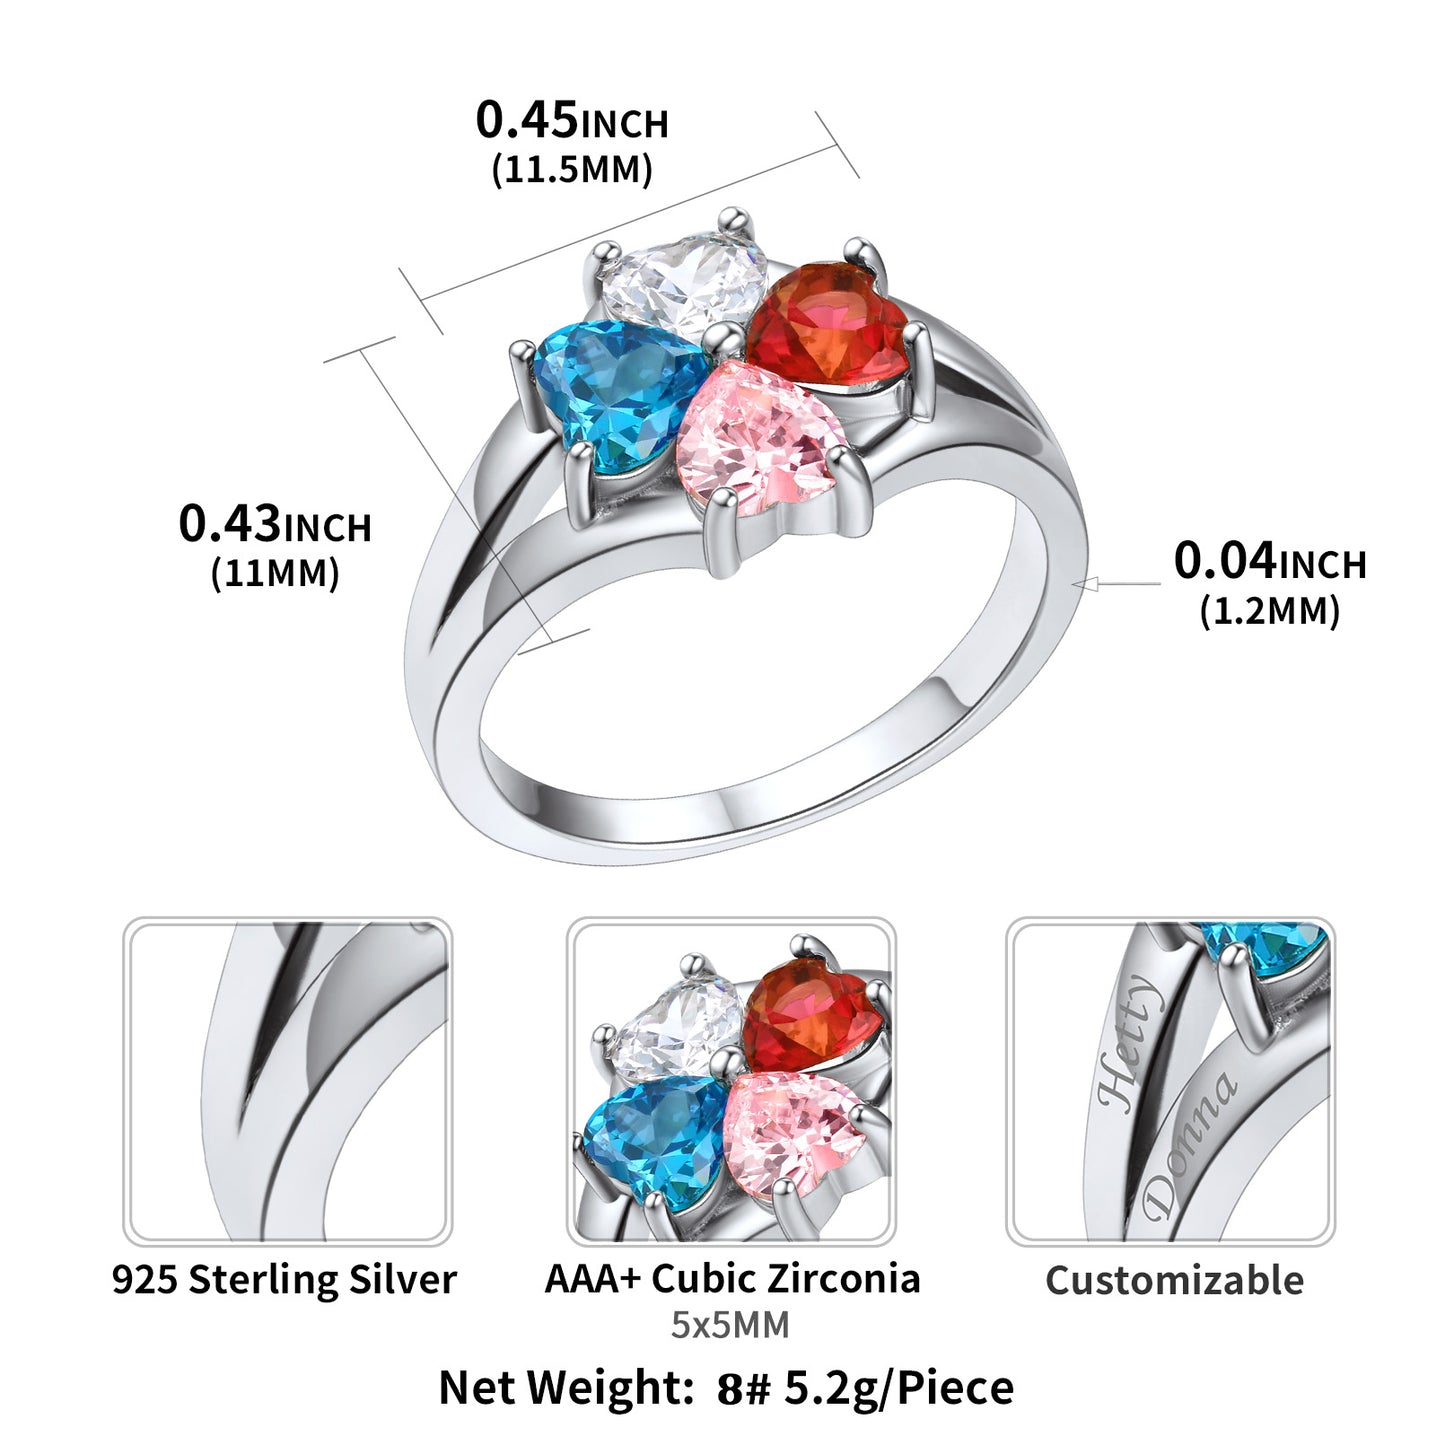 925 Sterling Silver Personalized Birthstone Rings For Women